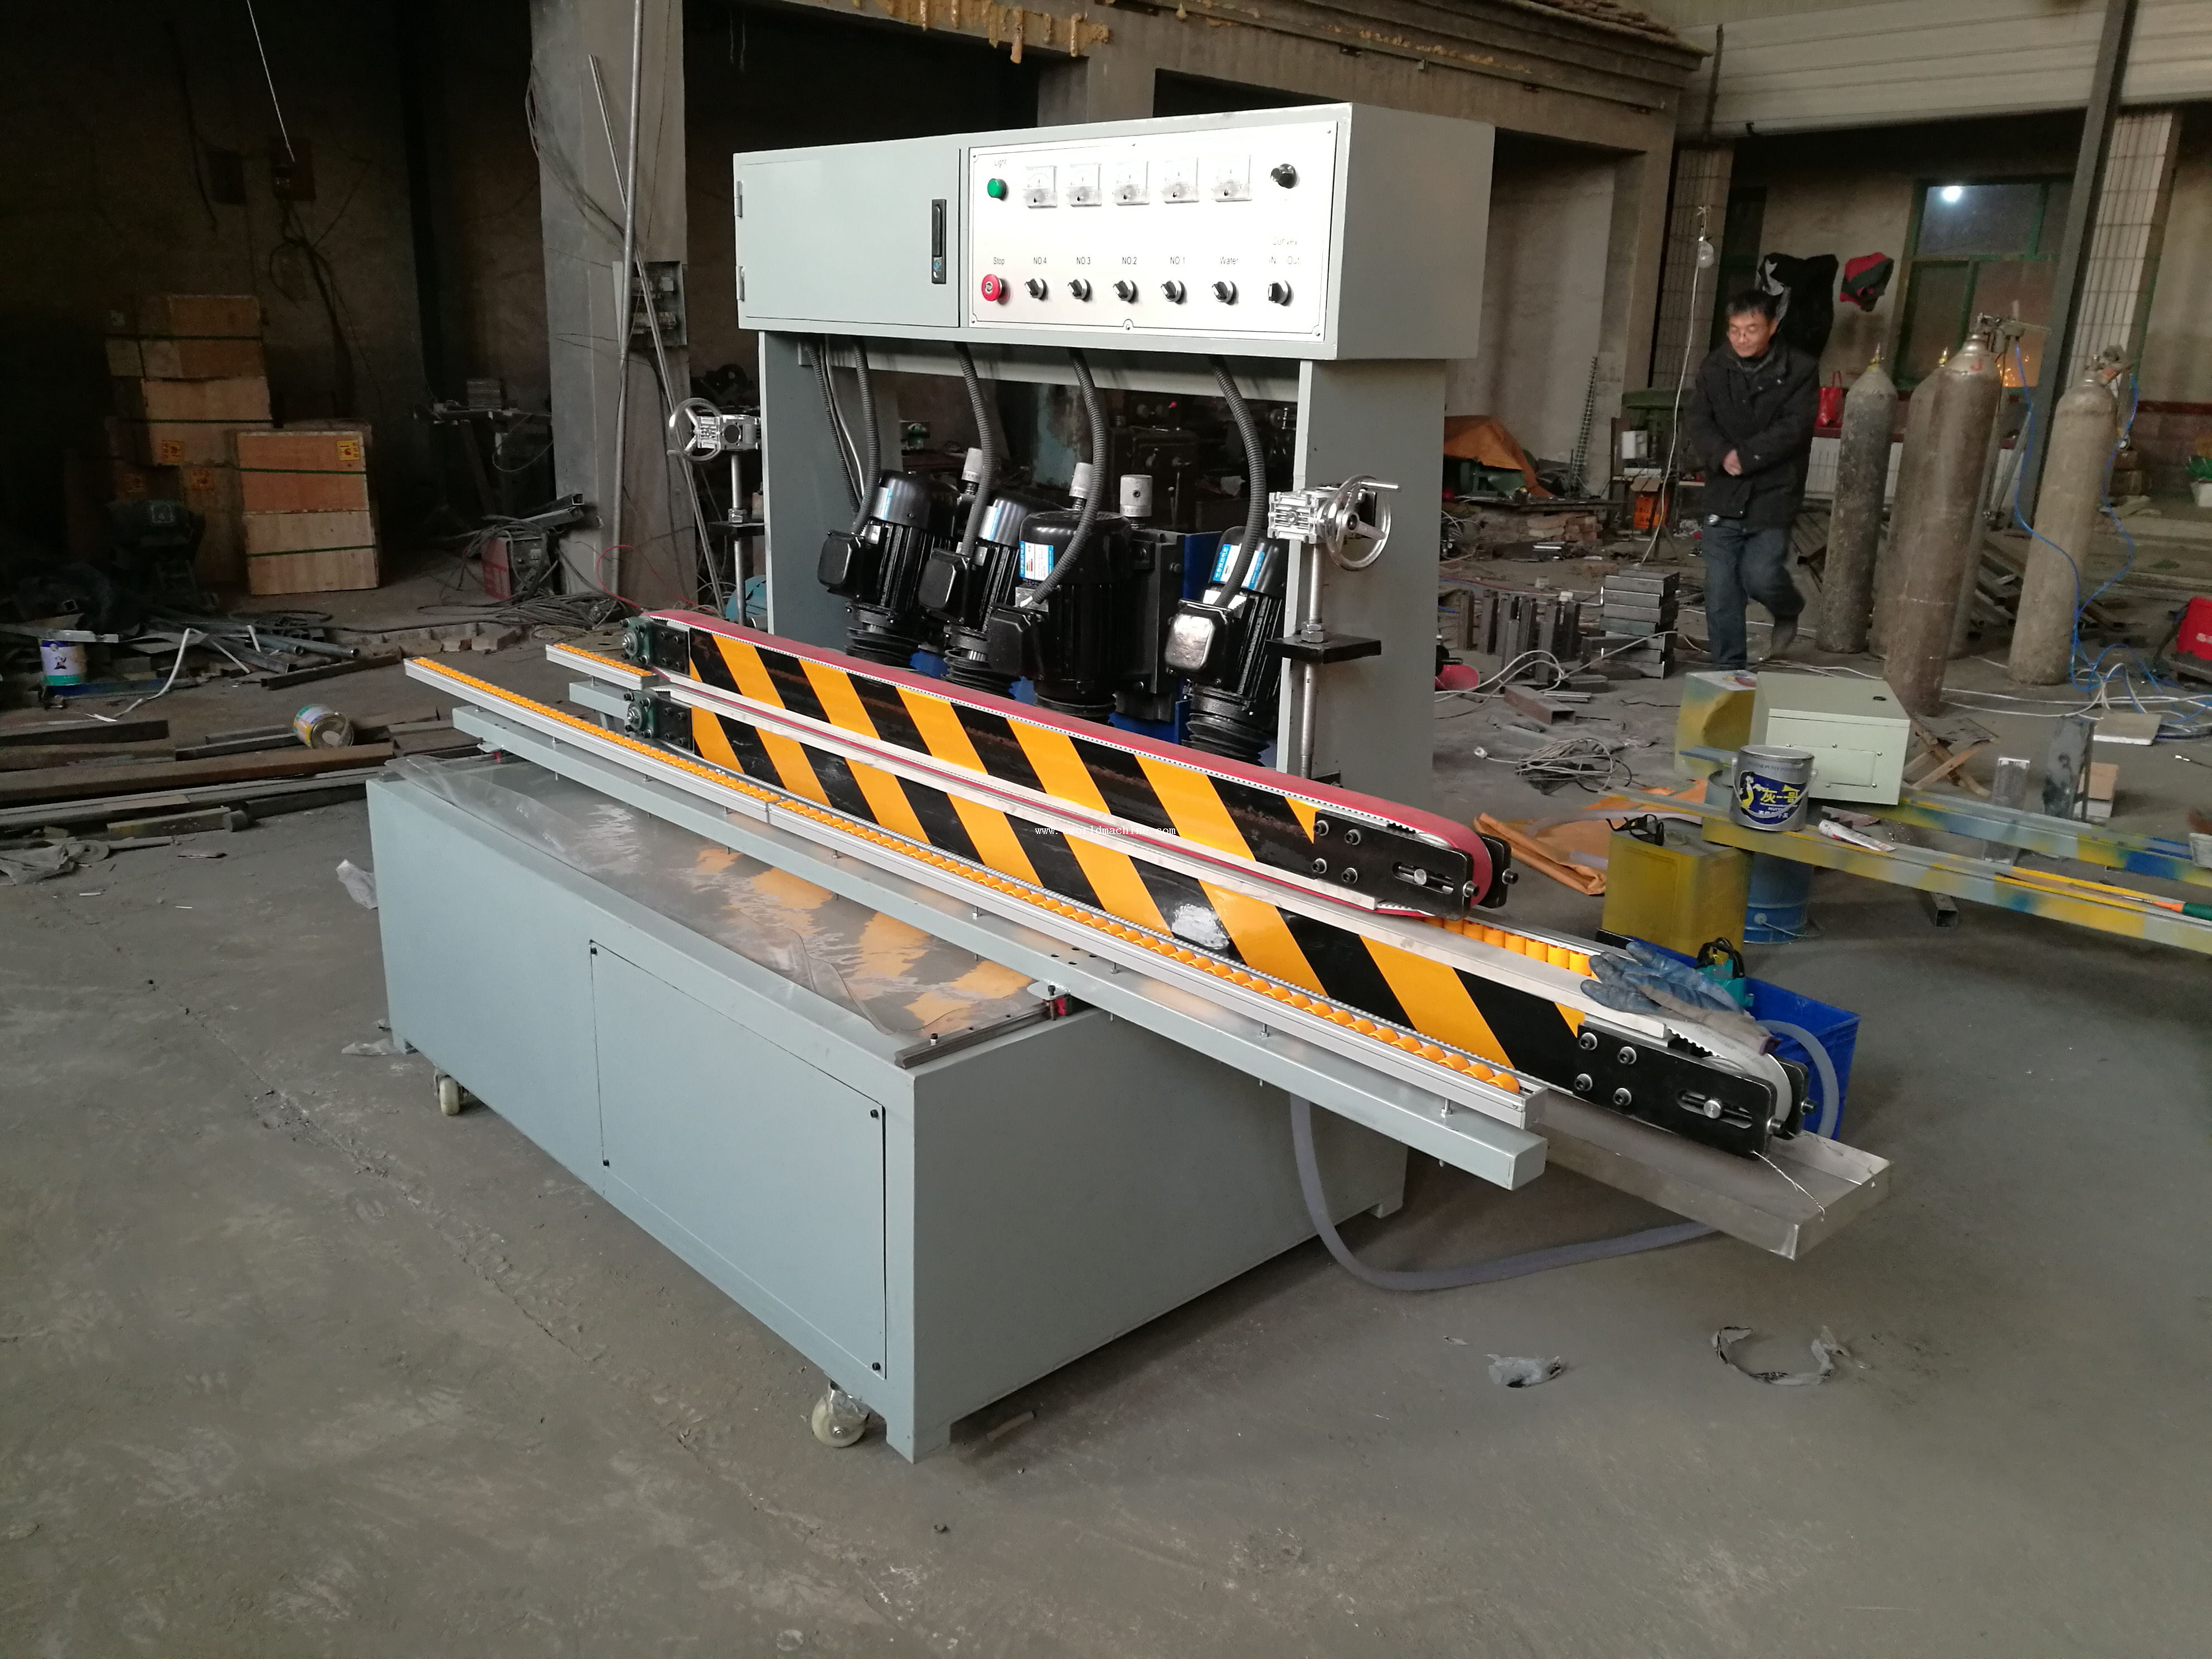 Portable Small Glass Straight Line Beveling Machine